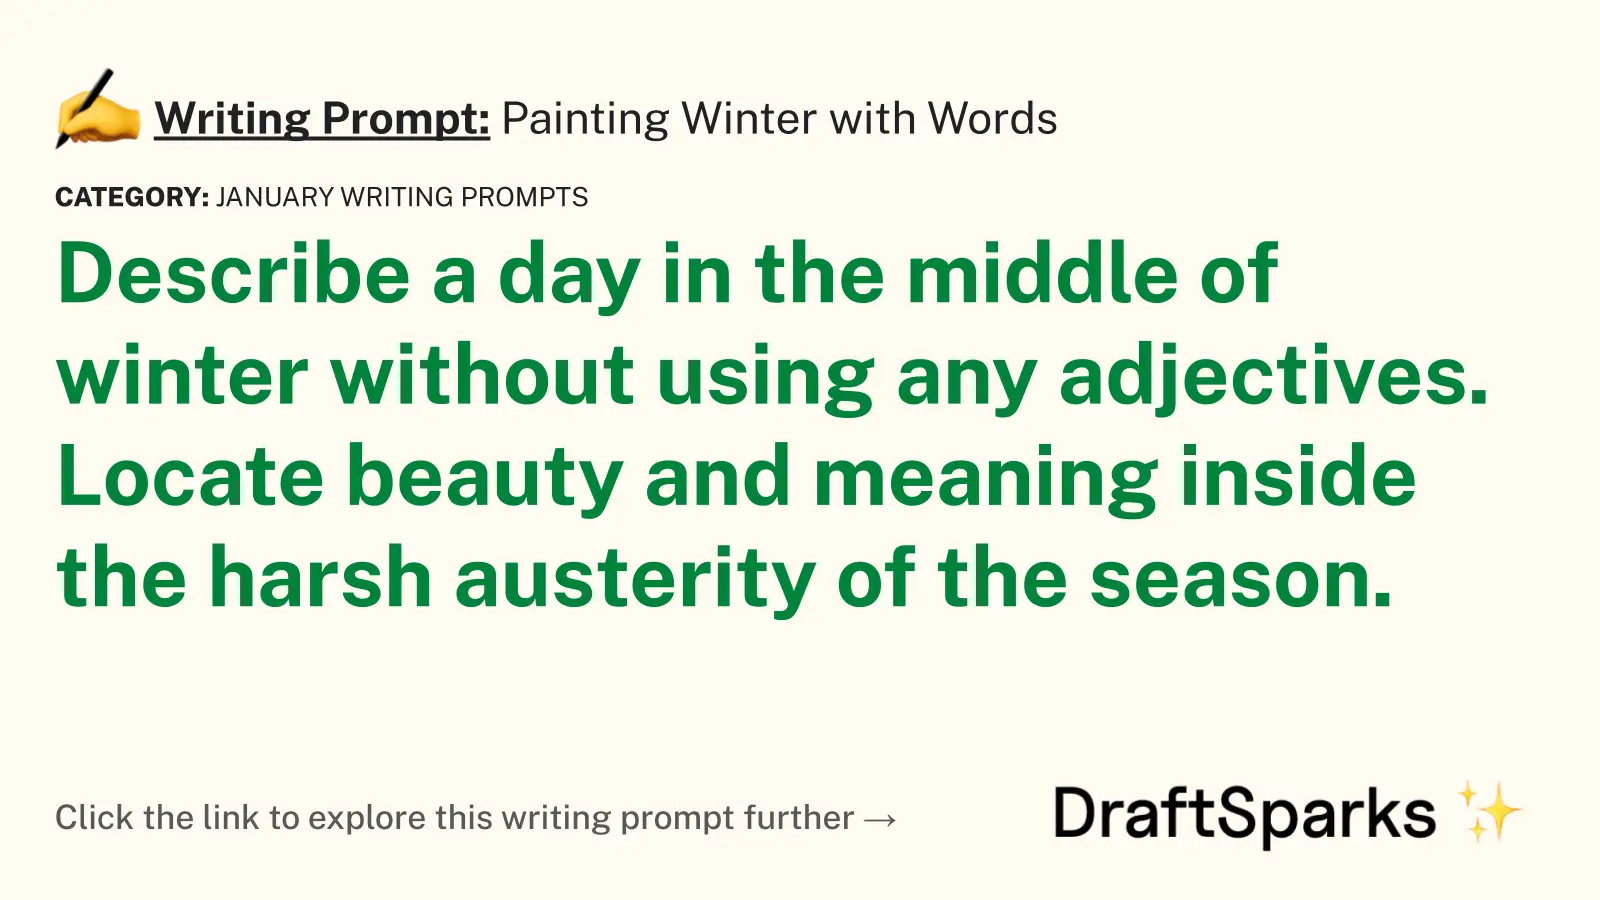 Painting Winter with Words